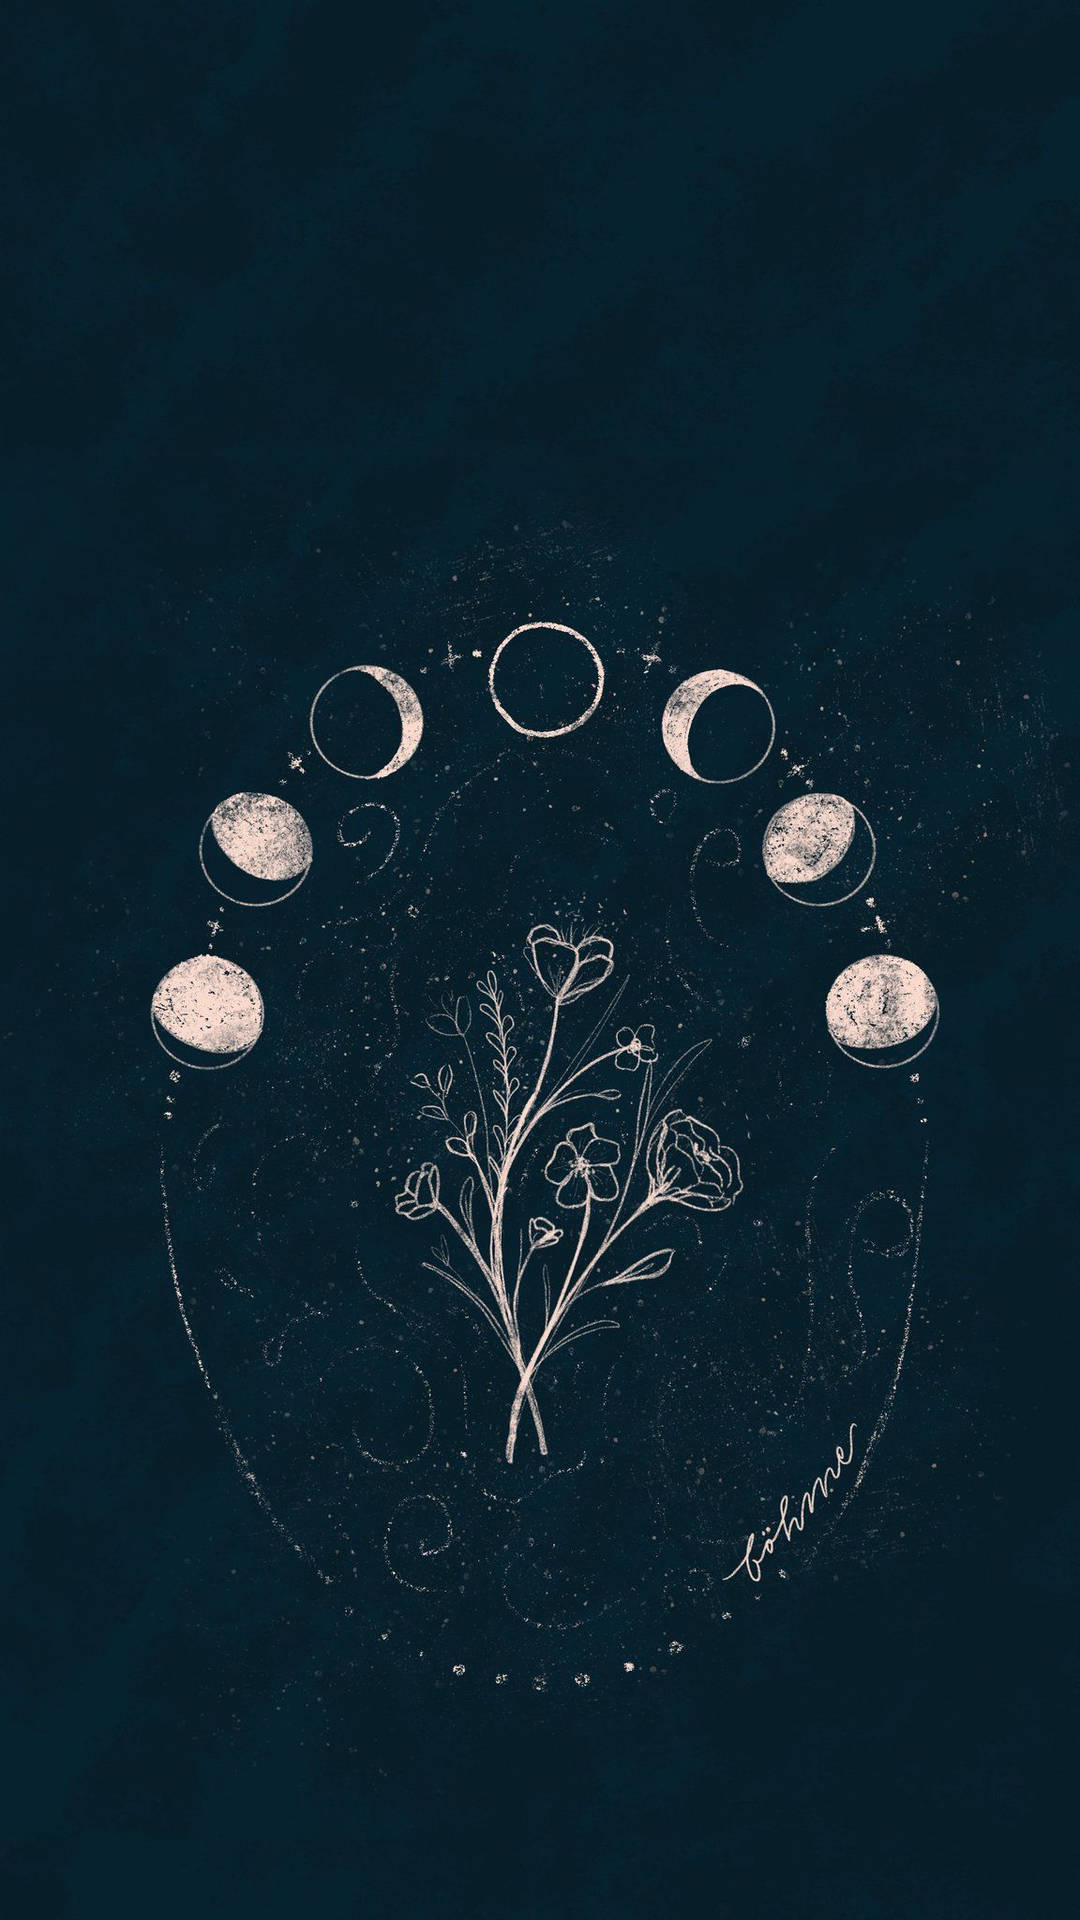 Moon phases wallpaper I made for my phone! - Witch, moon phases